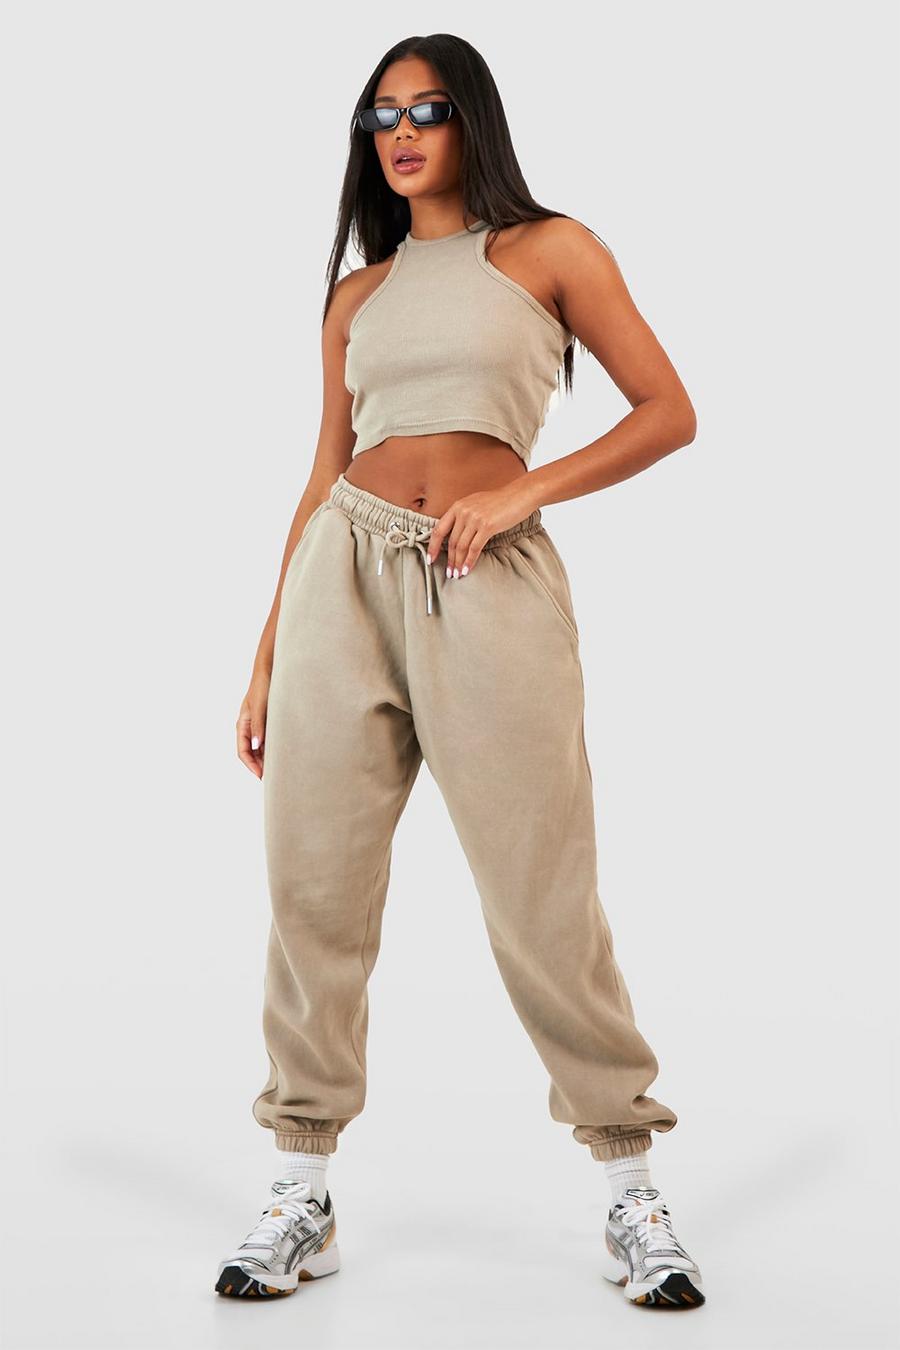 s Best-Selling Sweatpants Are $10 for Black Friday